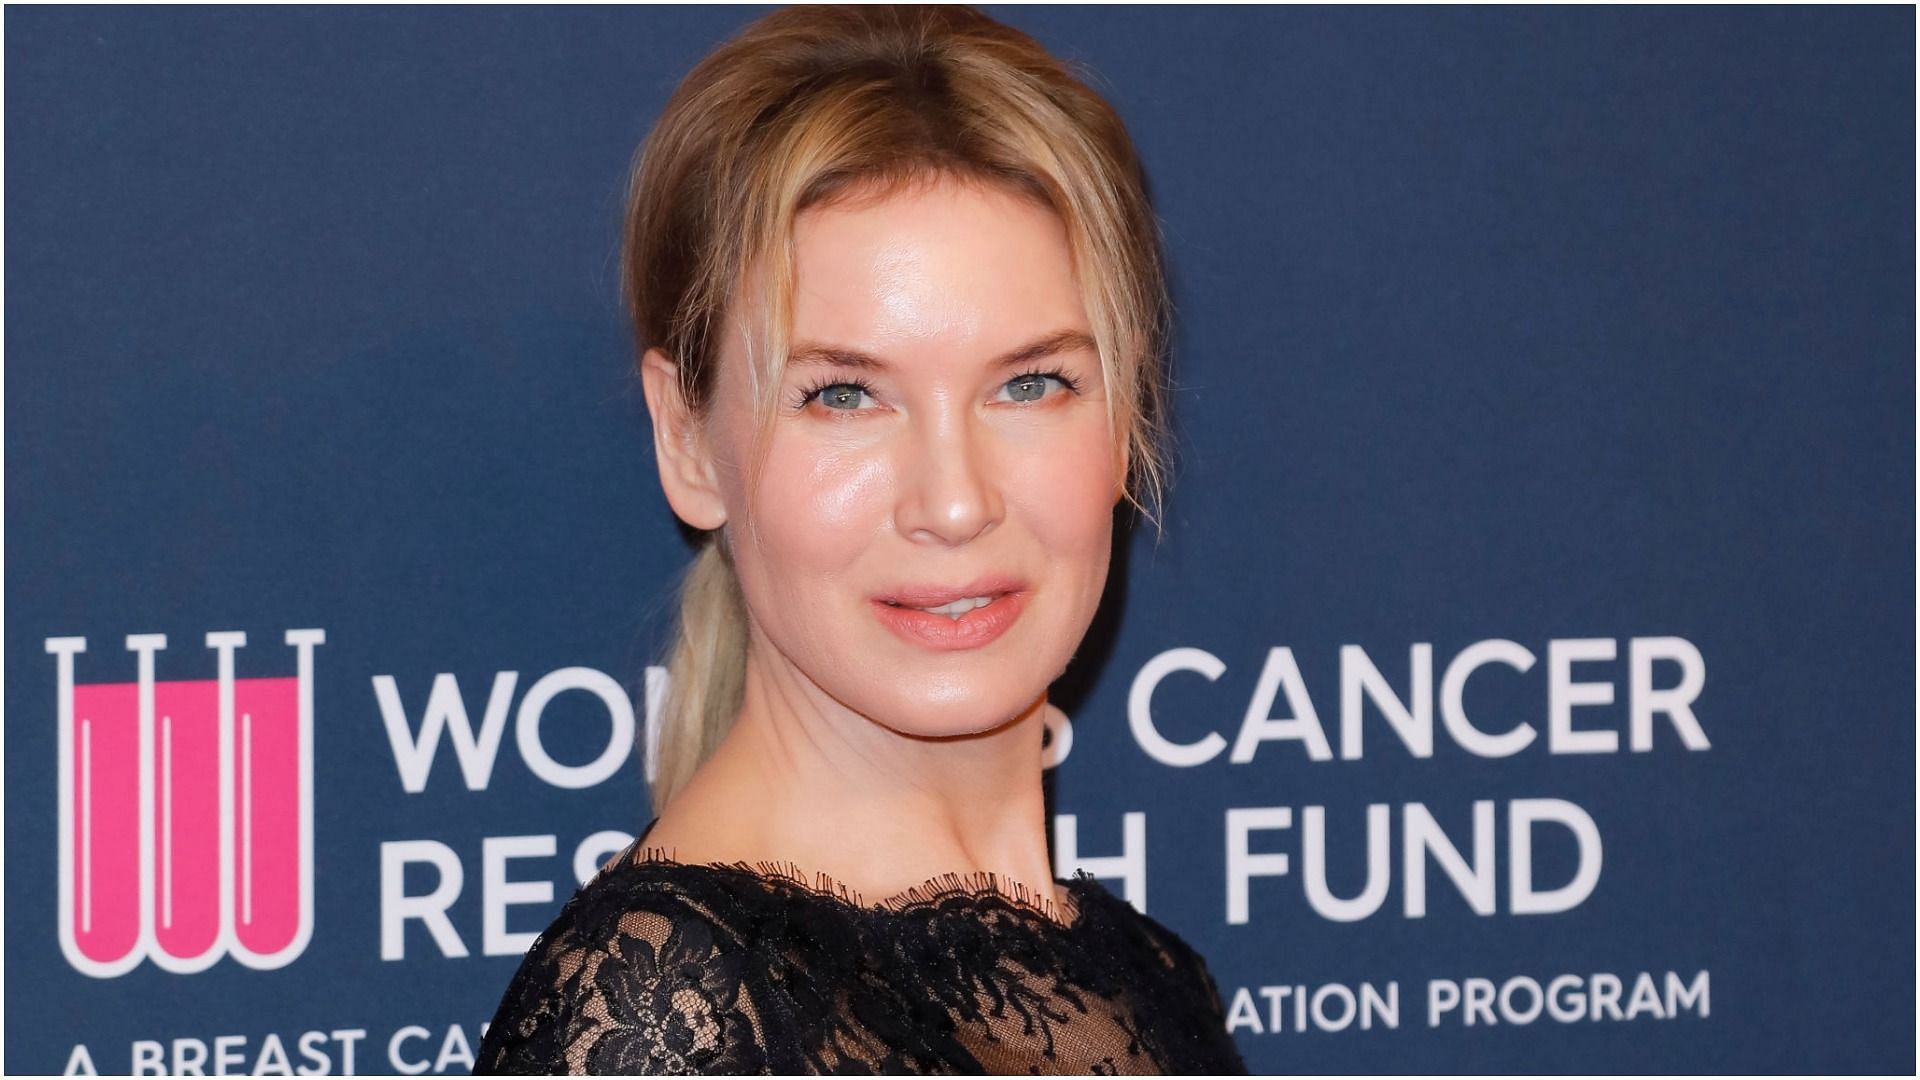 Ren&eacute;e Zellweger attends The Women&#039;s Cancer Research Fund&#039;s Unforgettable Evening 2020 at Beverly Wilshire, A Four Seasons Hotel on February 27, 2020 in Beverly Hills, California (Image via Getty Images)